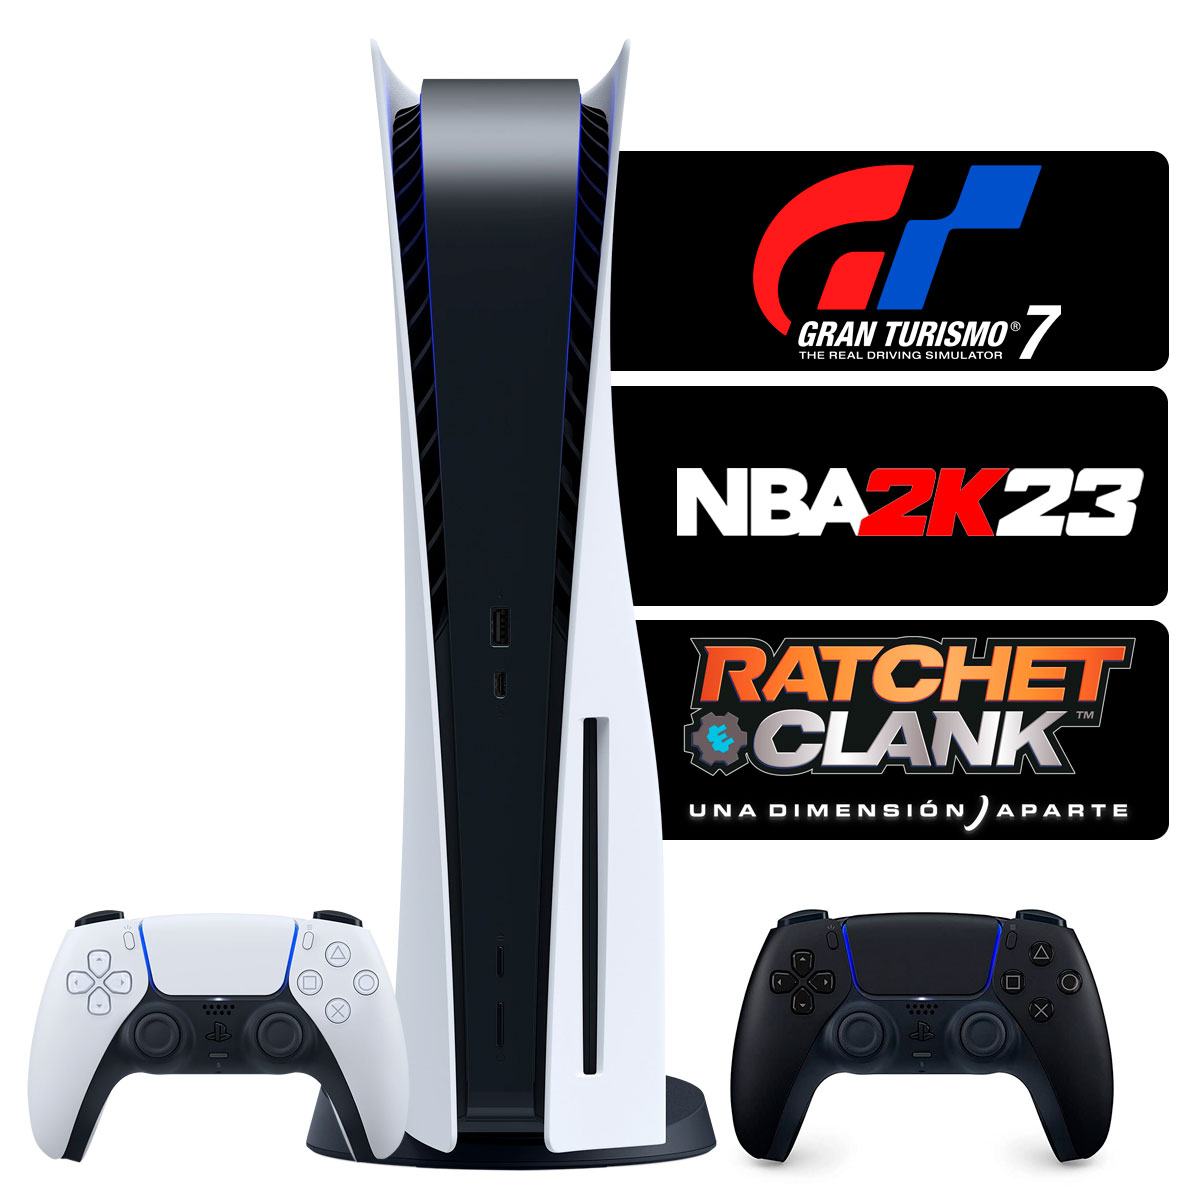 https://www.discoazul.co.uk/uploads/media/images/consola-ps5-2-mandos-gt7-nba-2k23-ratchet-and-clank-1.png